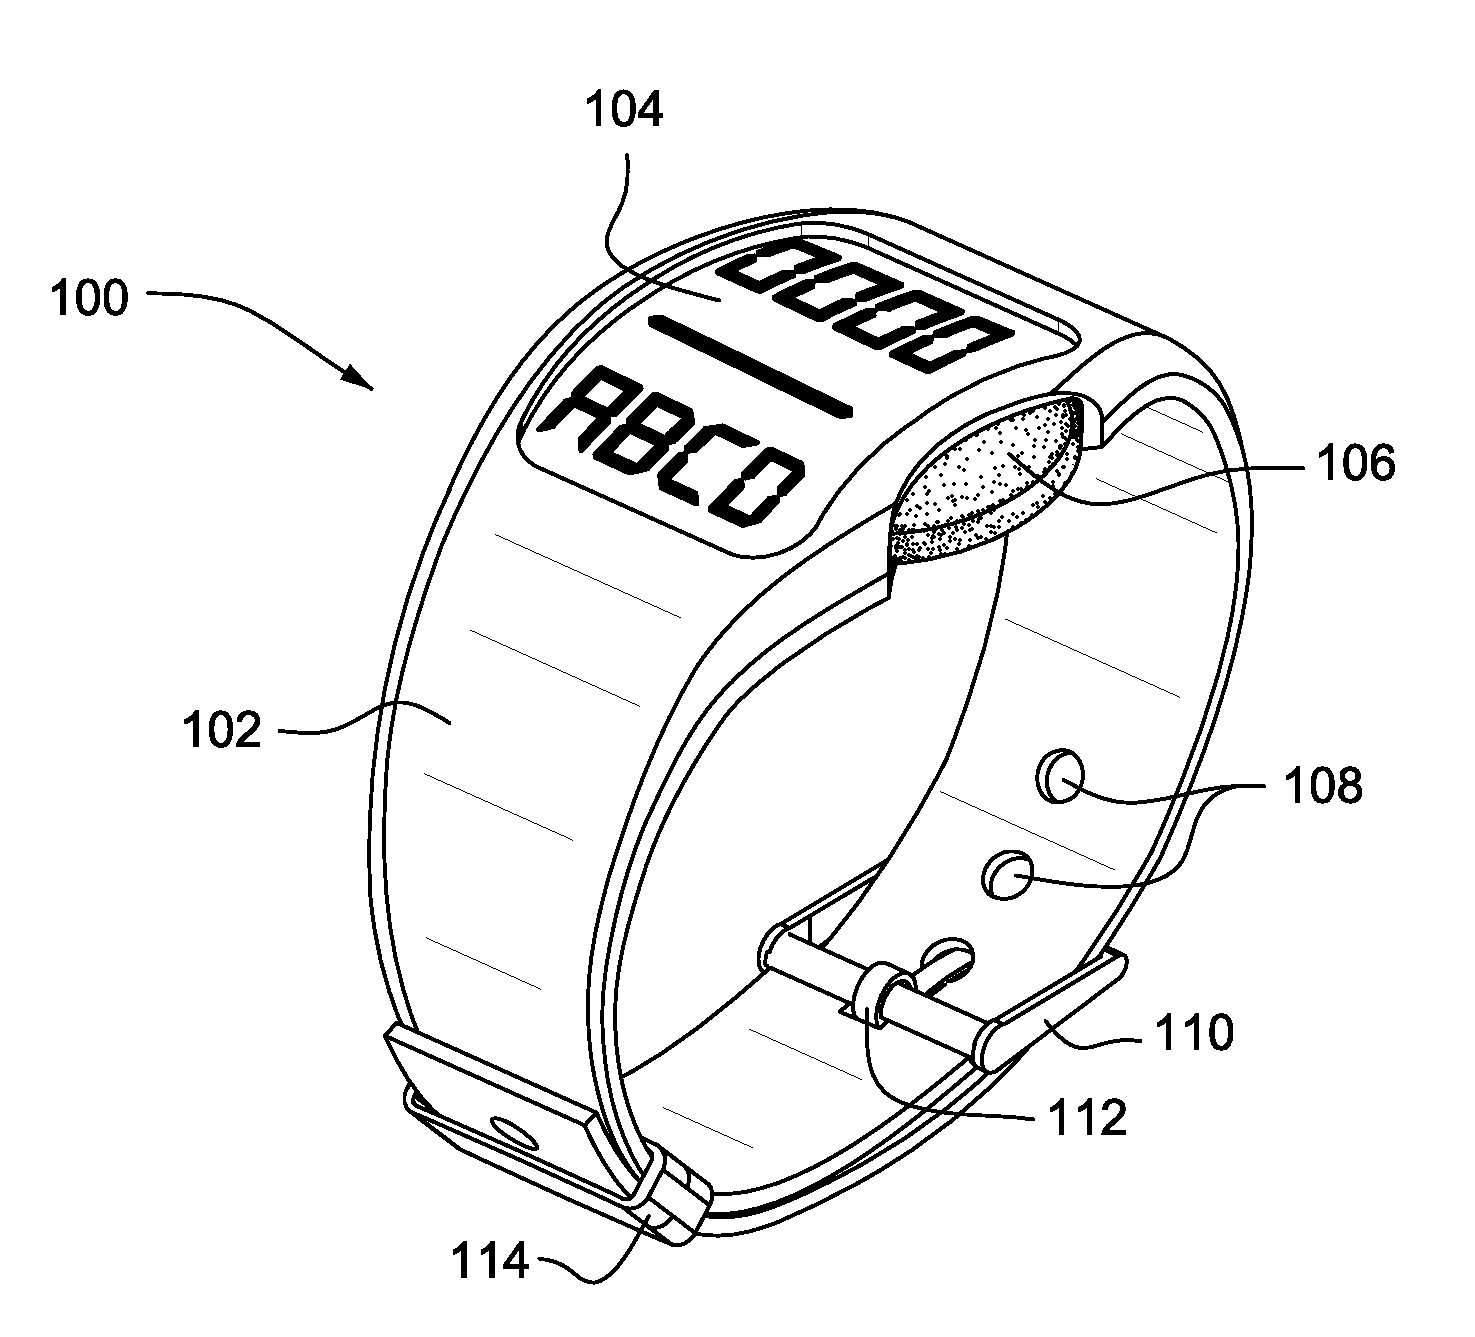 Tamper-alert resistant bands for human limbs and associated monitoring systems and methods